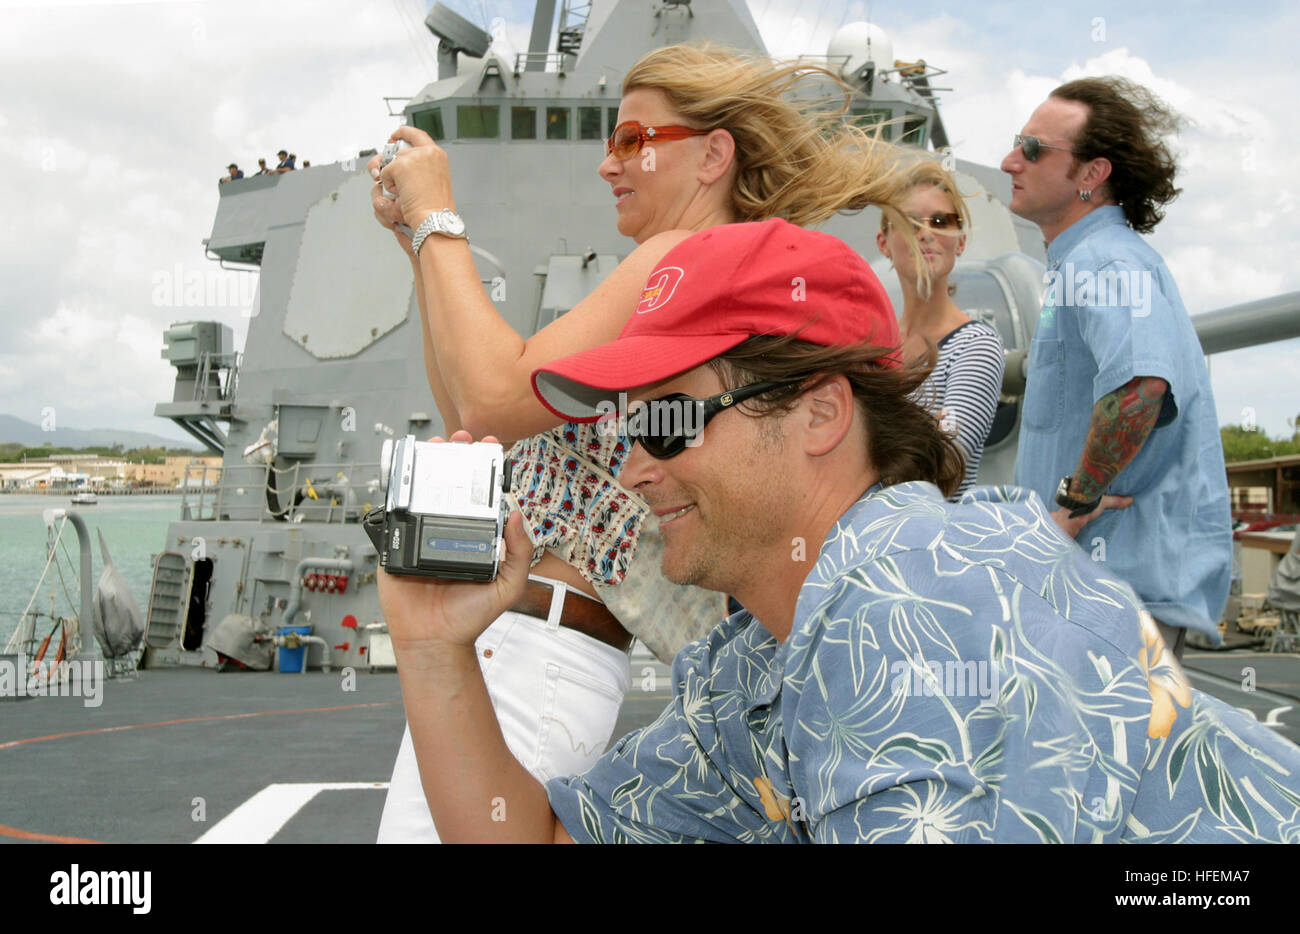 030630-N-3228G-002 Pearl Harbor, Hawaii (Jun. 30, 2003)  -- Actor Rob Lowe, and wife Sheryl Berkoff take photos during a tour of the guided missile destroyer USS Russell (DDG 59) provided by the ships Commanding Officer Cmdr. W. A. Kearns. Lowe and his family are in Hawaii for vacation and were also treated to a tour of Pearl Harbor by Commander, Navy Region Hawaii Rear Adm. Barry McCullough.  U.S. Navy photo by PhotographerÕs Mate 1st Class William R. Goodwin. (RELEASED) US Navy 030630-N-3228G-002 Actor Rob Lowe, and wife Sheryl Berkoff take photos during a tour of the guided missile destroye Stock Photo